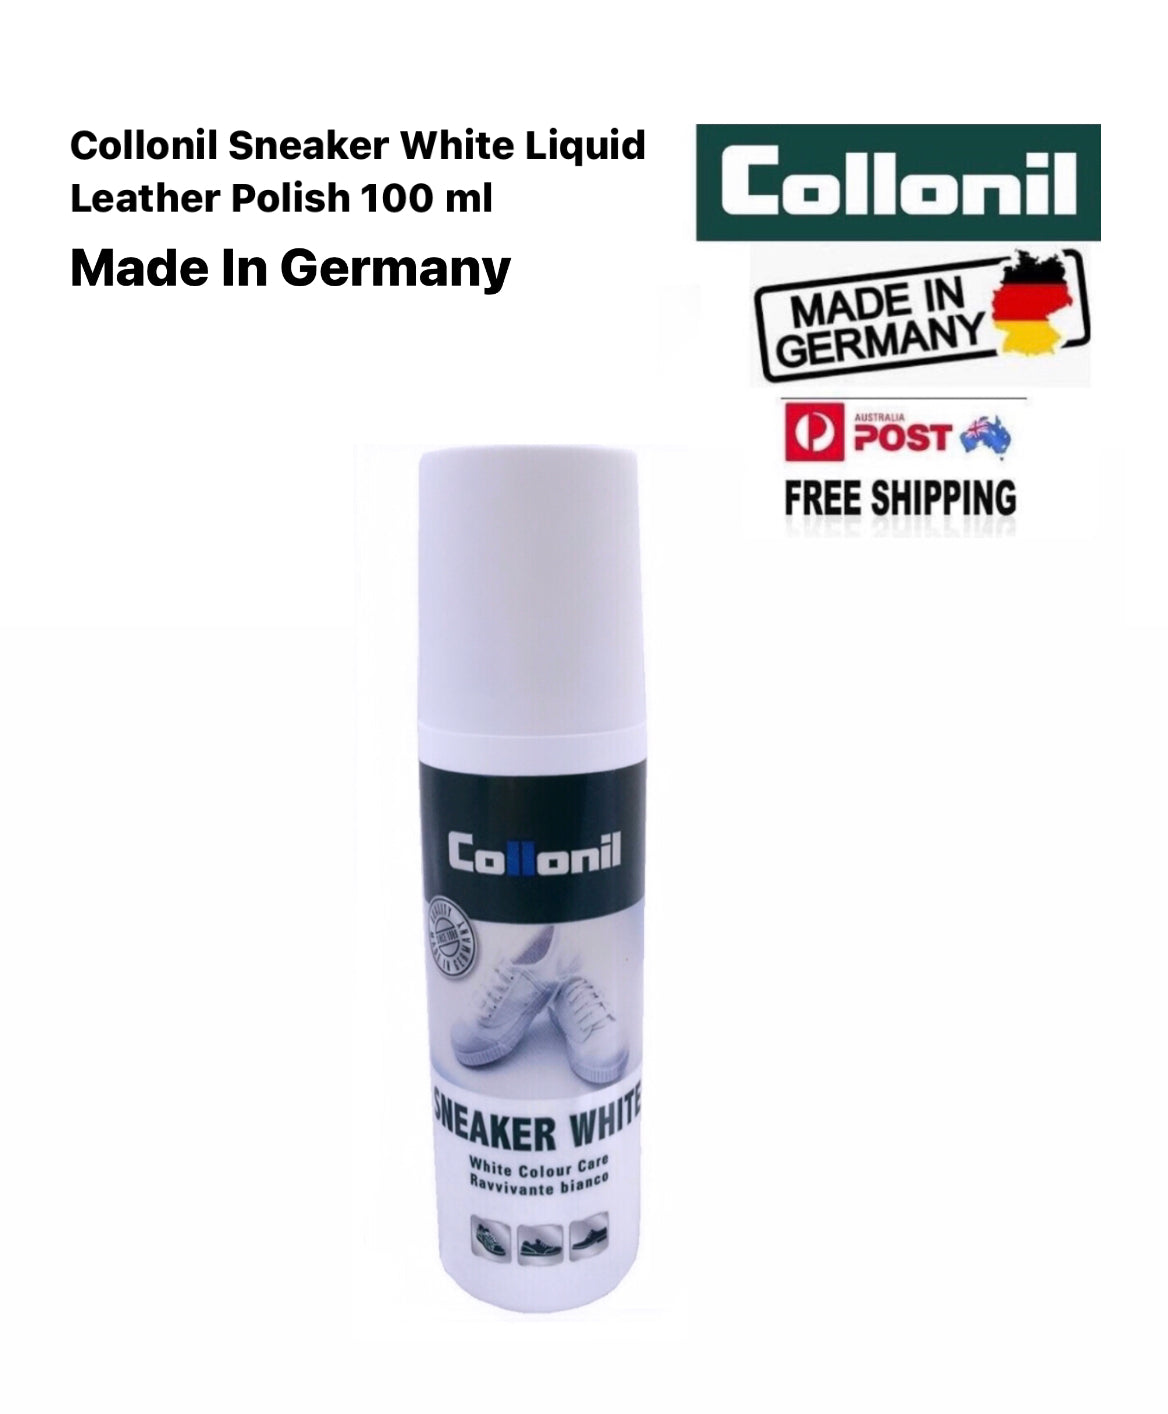 Collonil Sneaker White Liquid Leather Polish 100ml Made In Germany